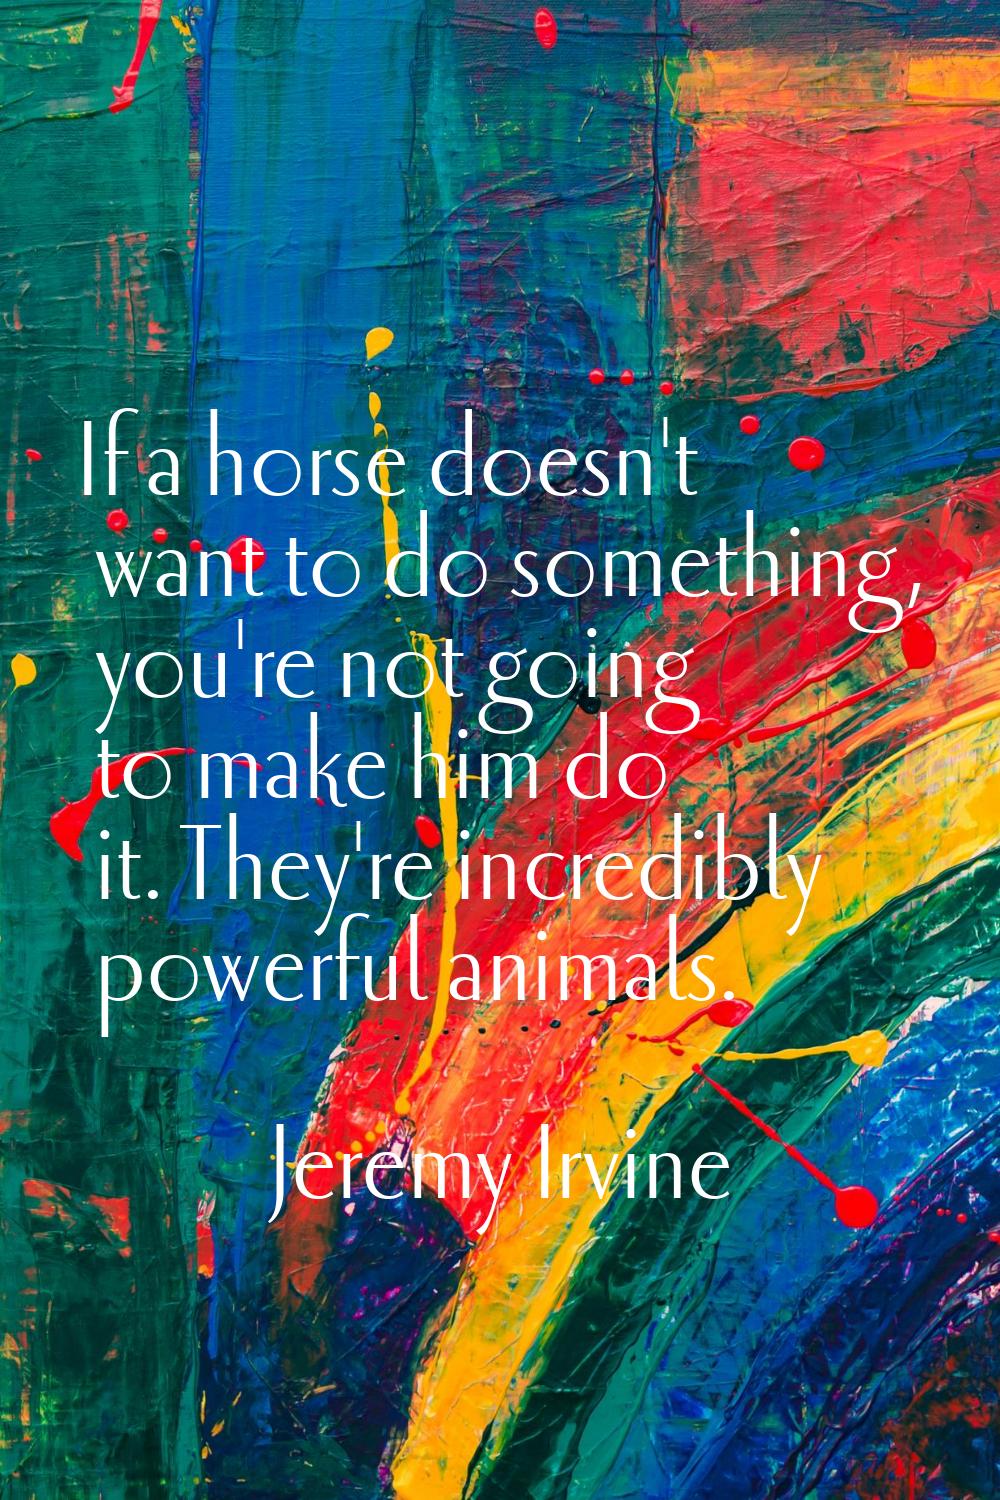 If a horse doesn't want to do something, you're not going to make him do it. They're incredibly pow